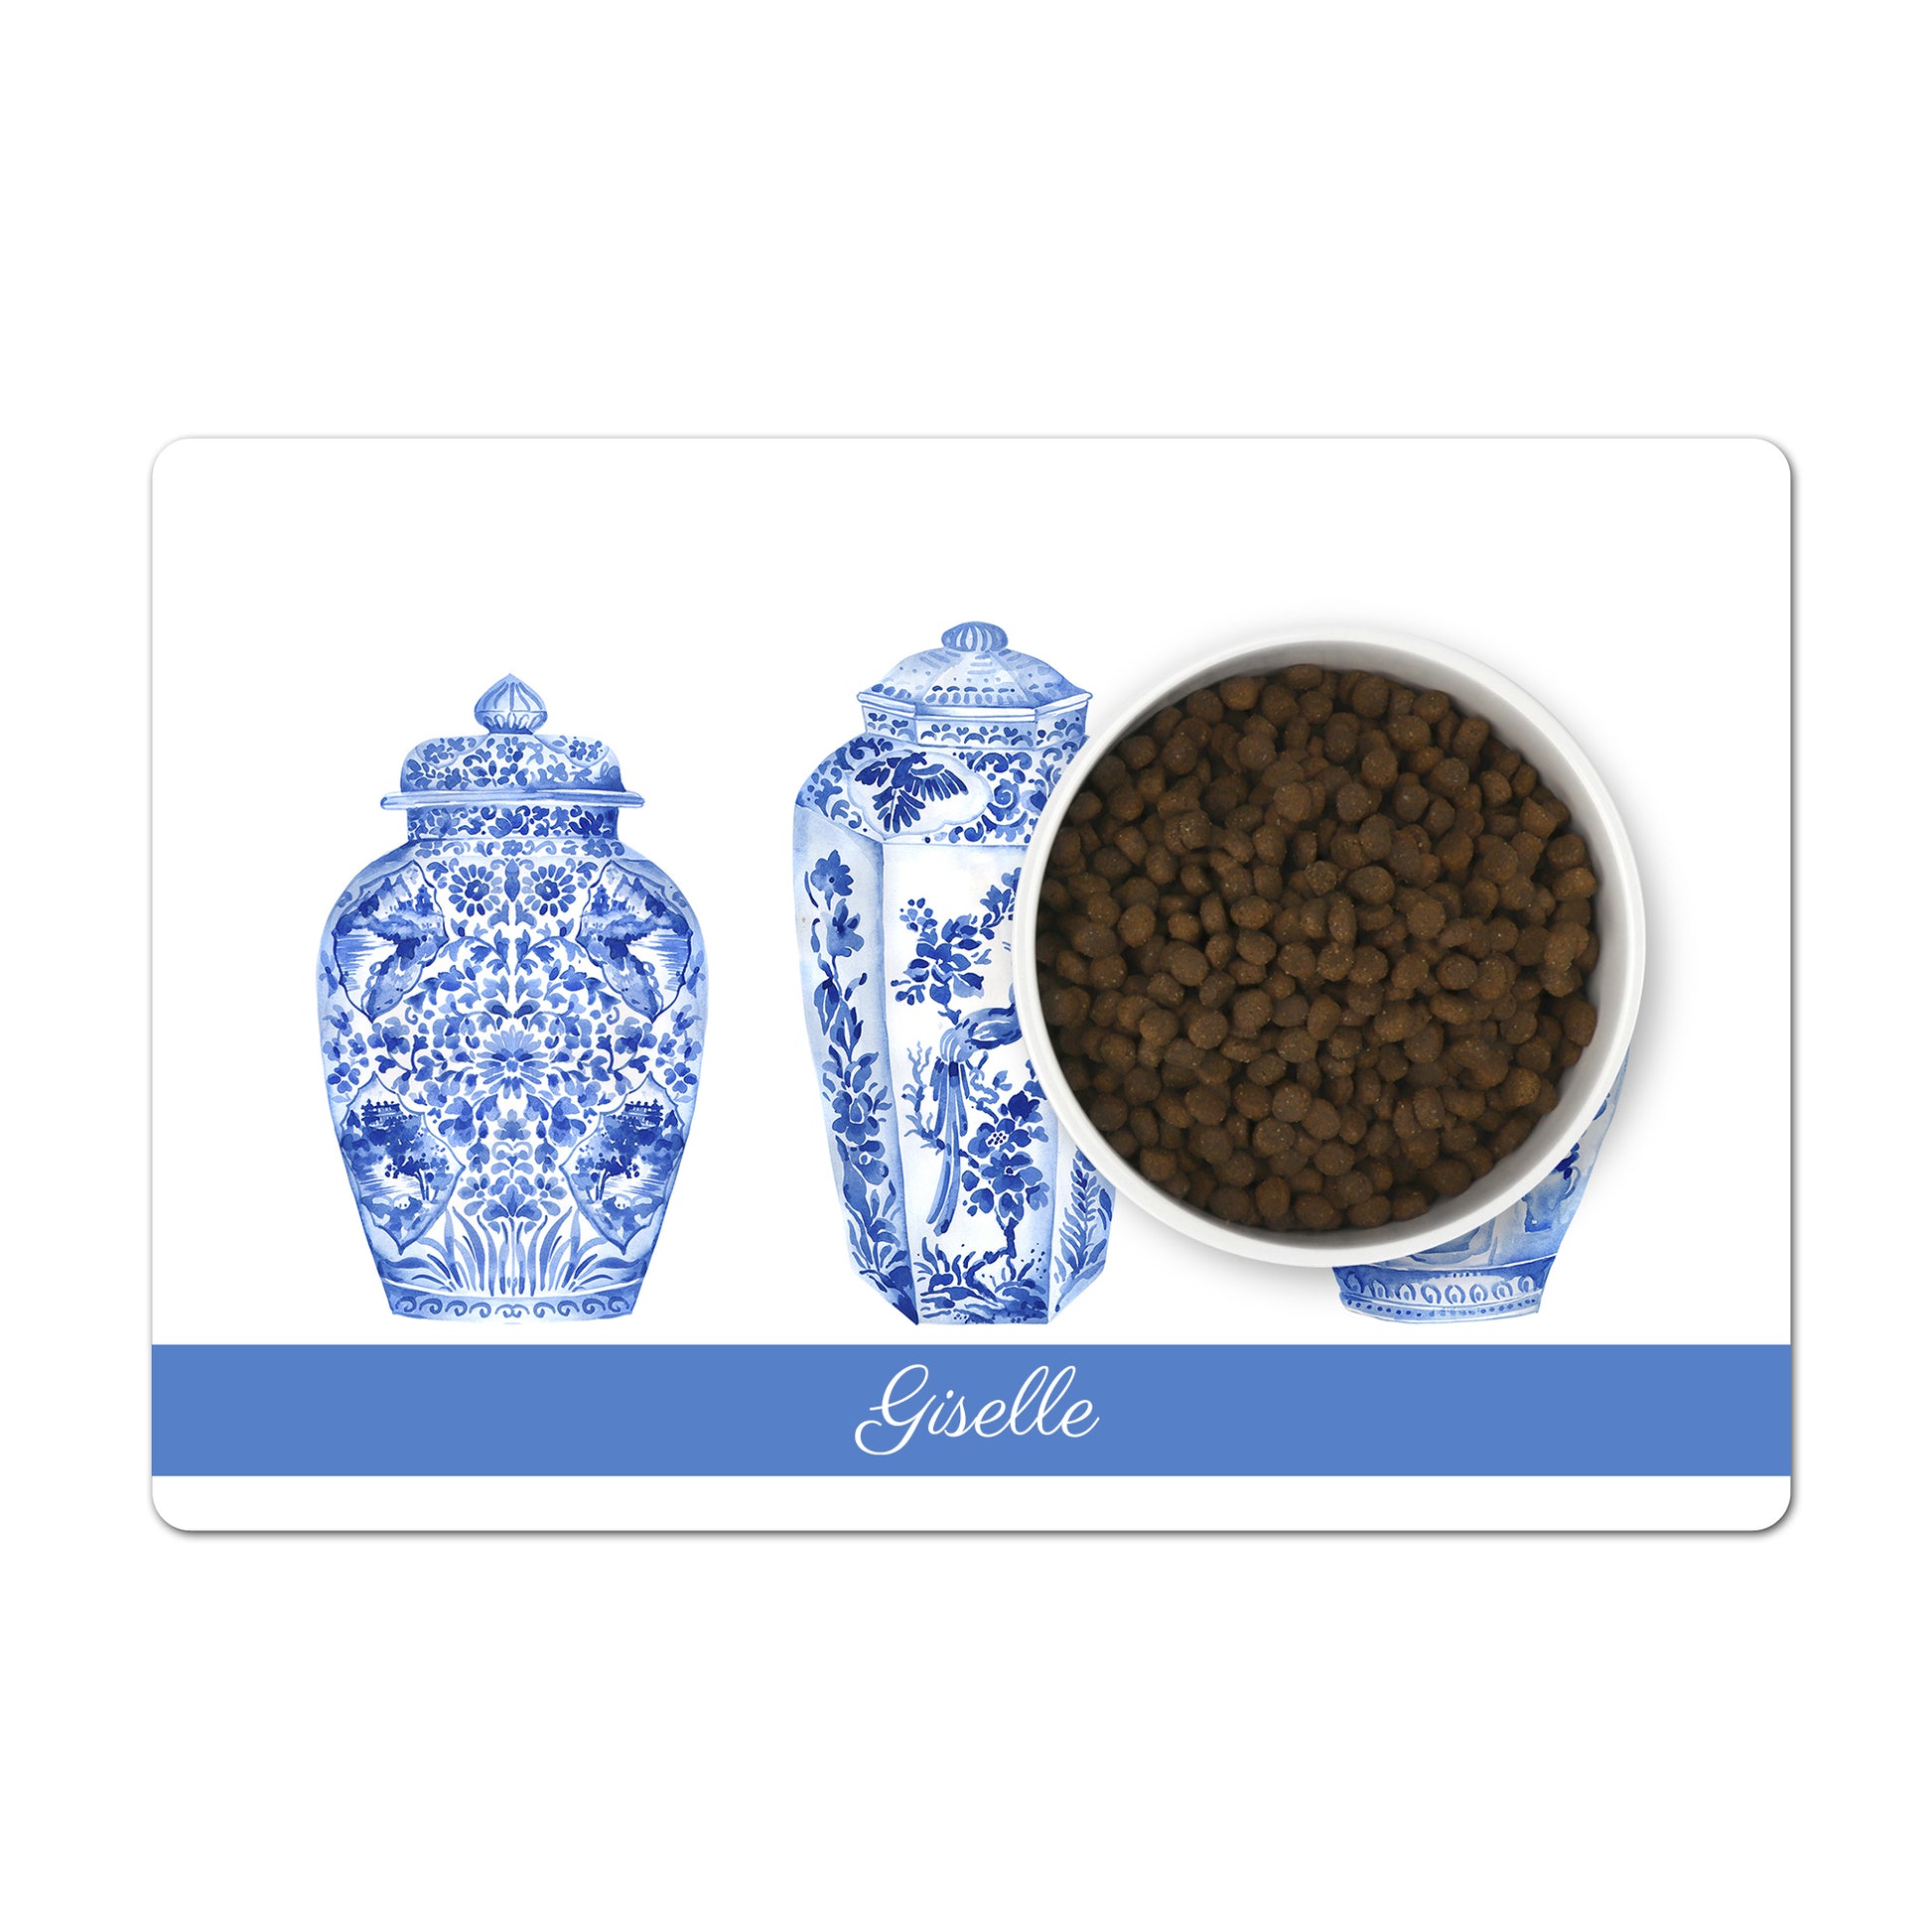 Personalized Pet Food mat with large blue and white chinoiserie ginger jars.